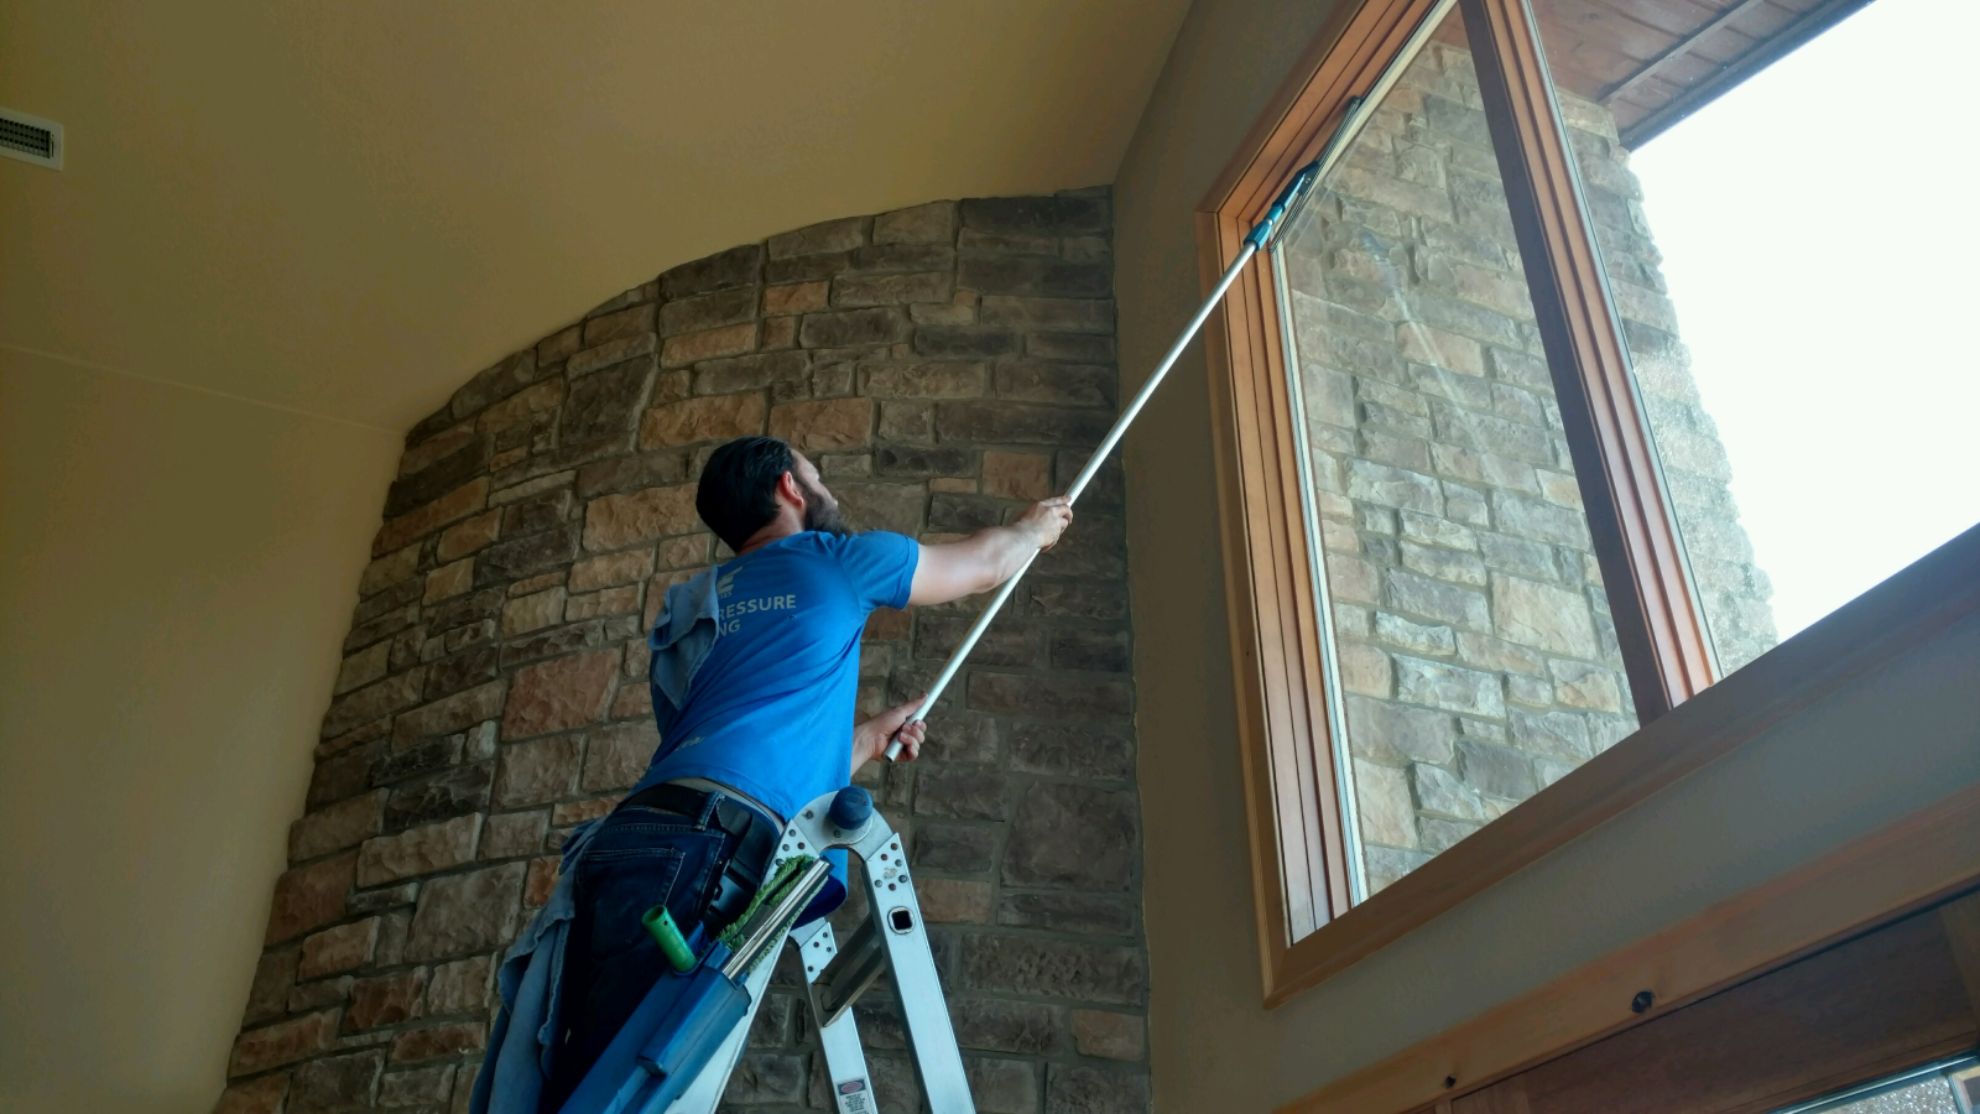 Cleaning windows on those difficult and time consuming windows.